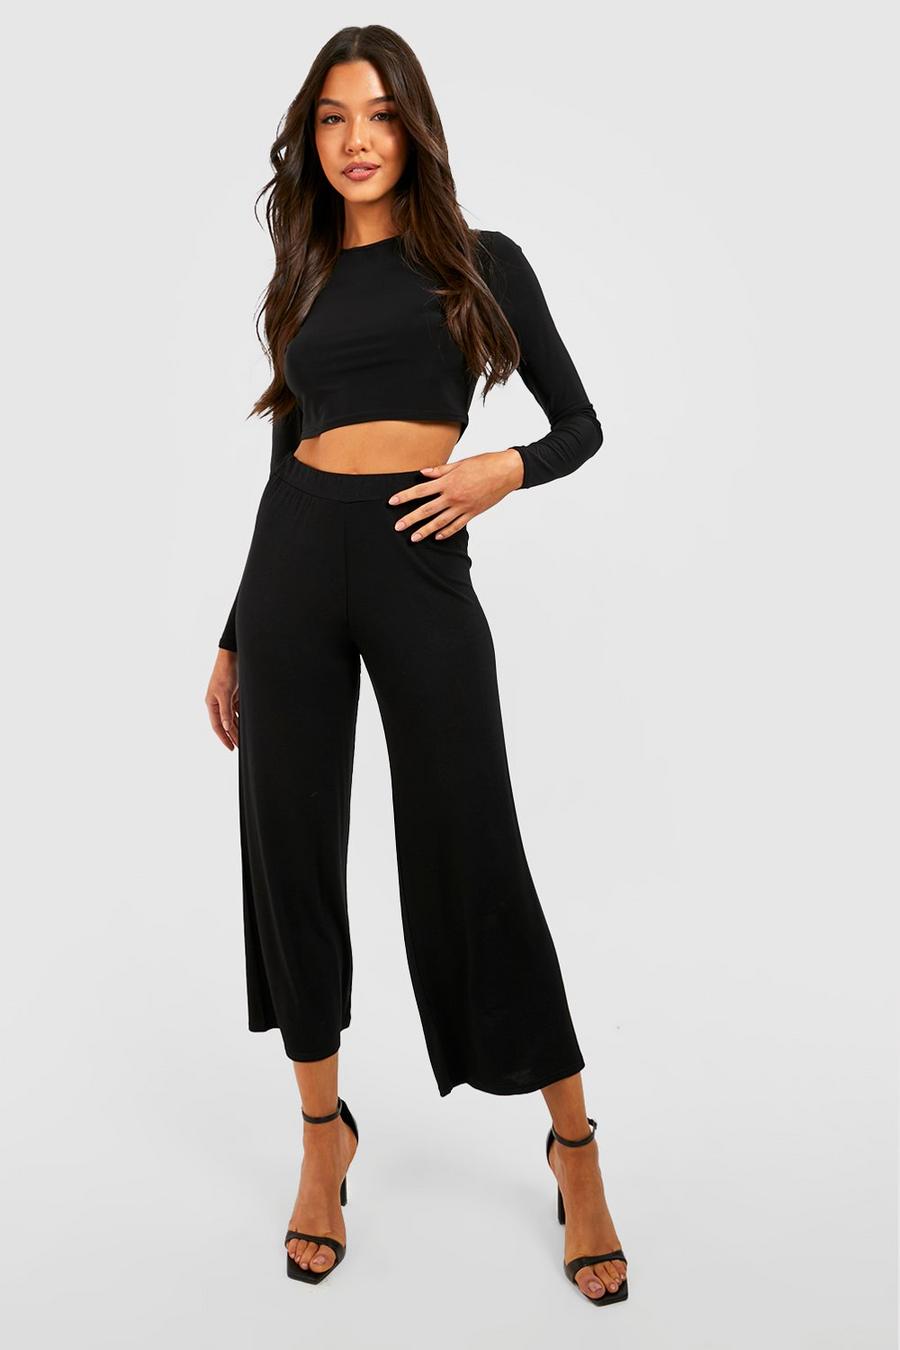 Basic Solid Black High Waisted Jersey Culottes